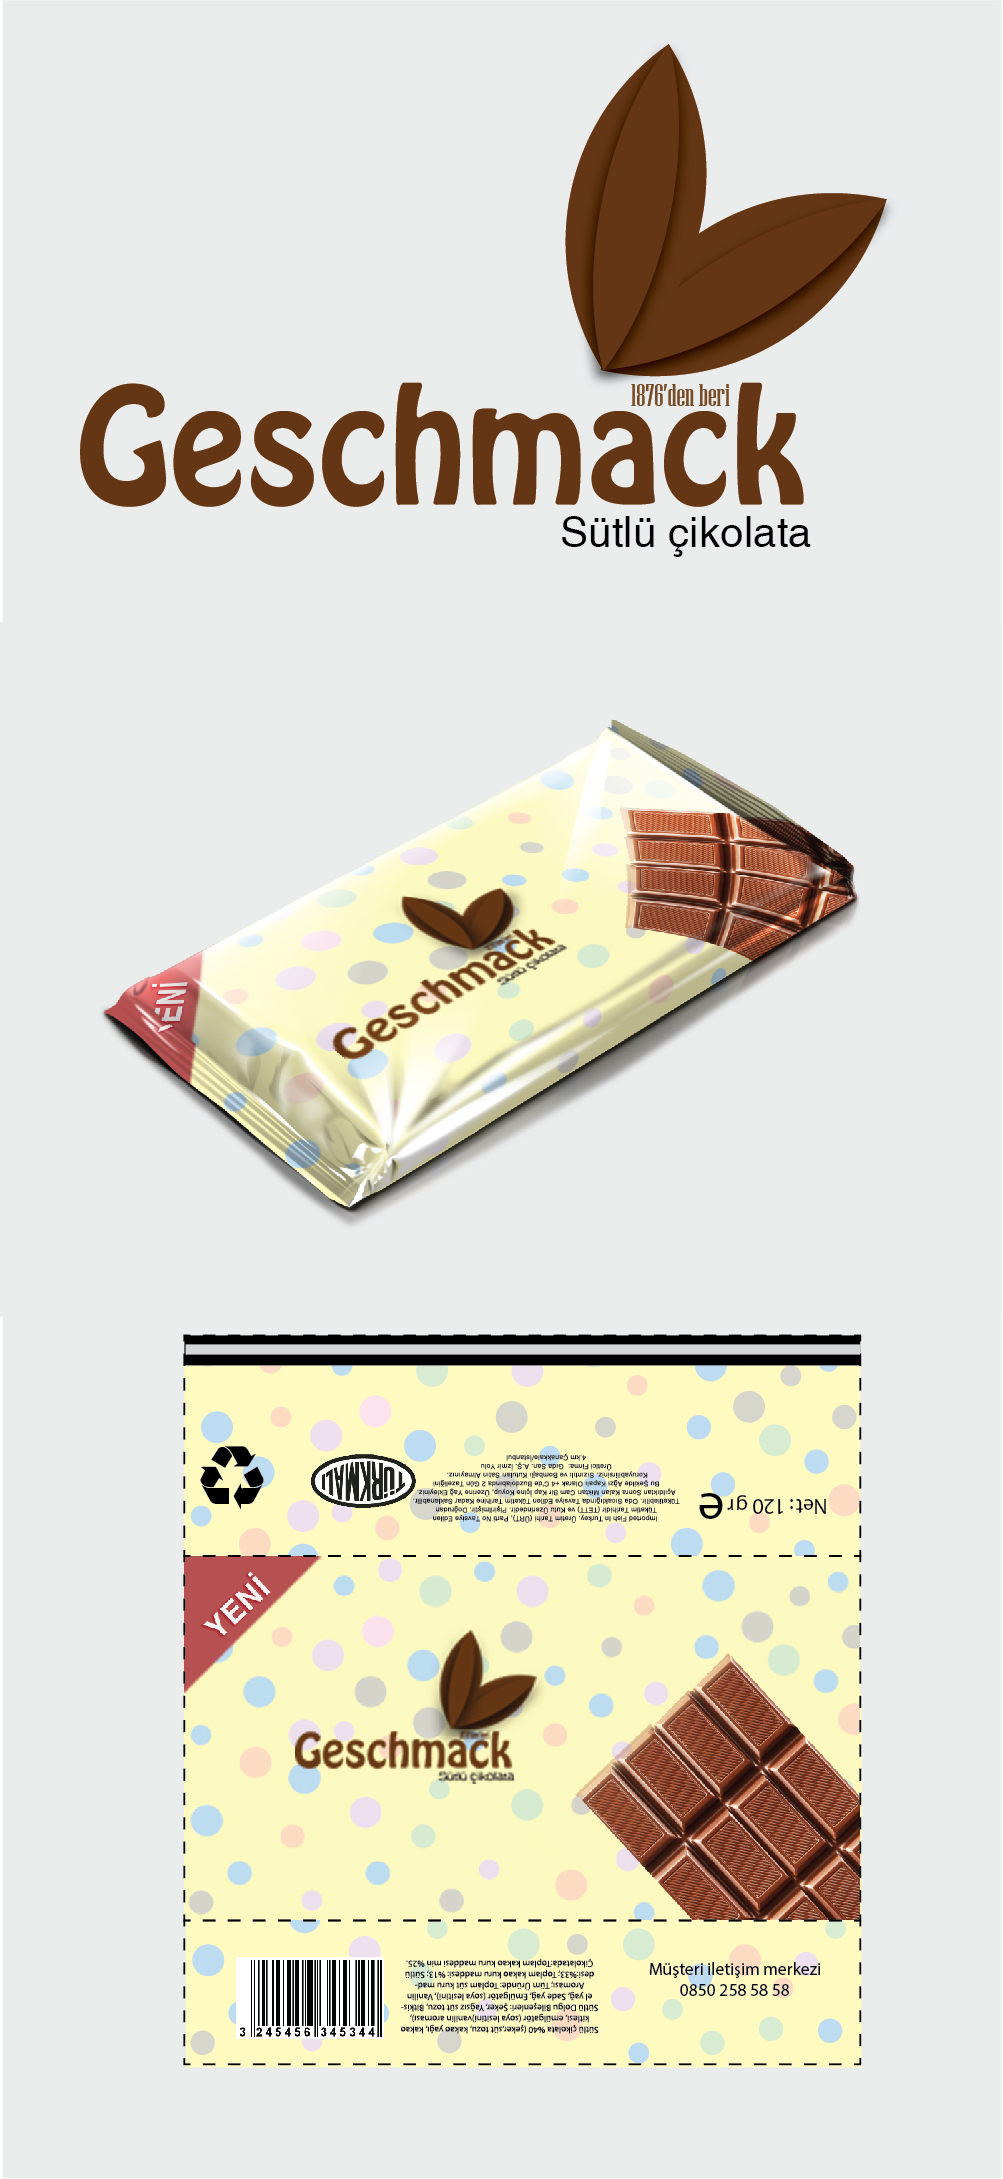 graphic desing packing chocolate product brand